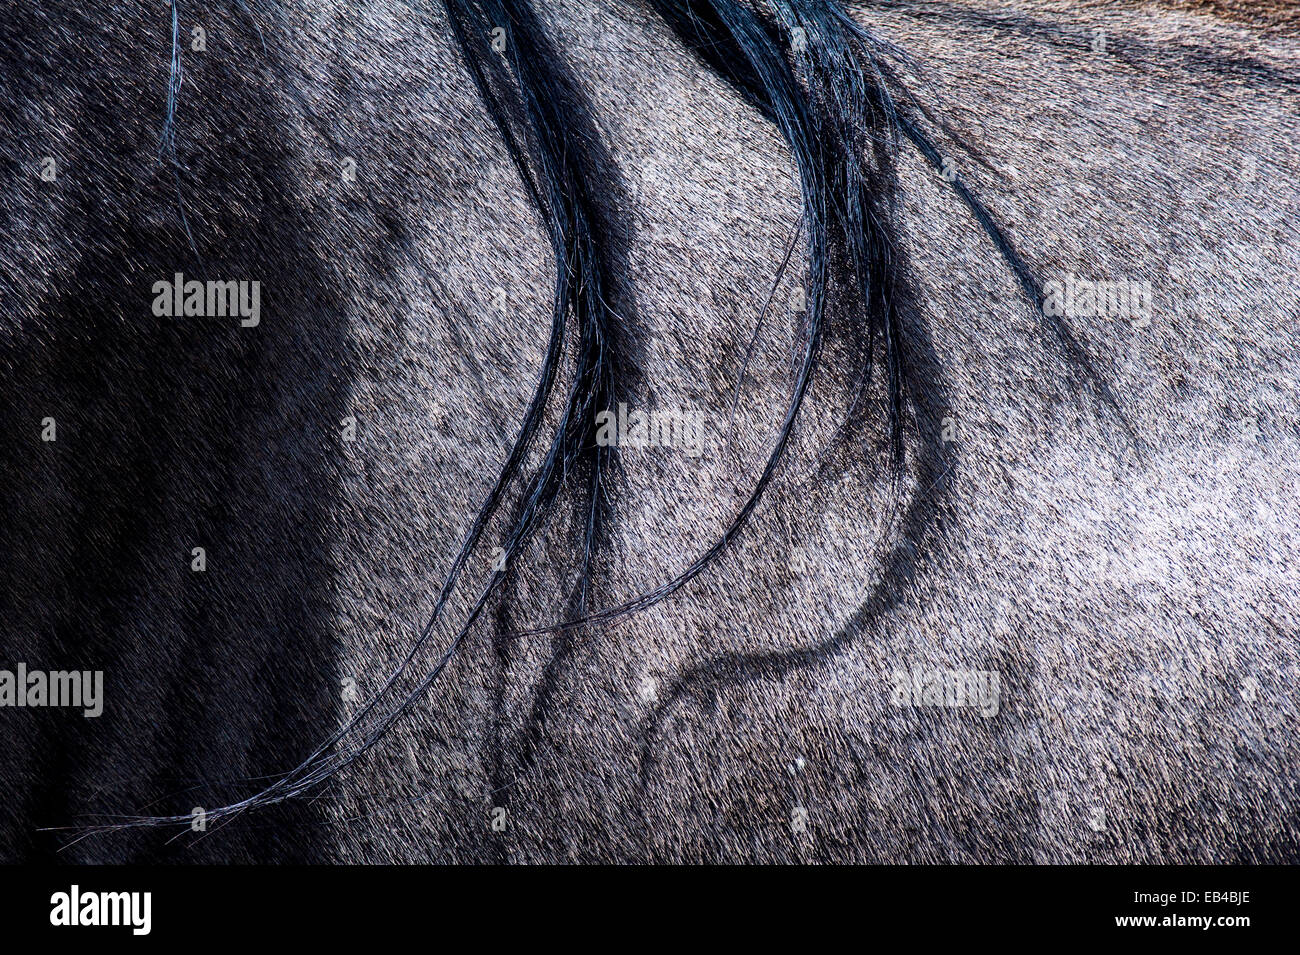 The wispy mane hairs of a blue wildebeest hang across its shoulder. Stock Photo